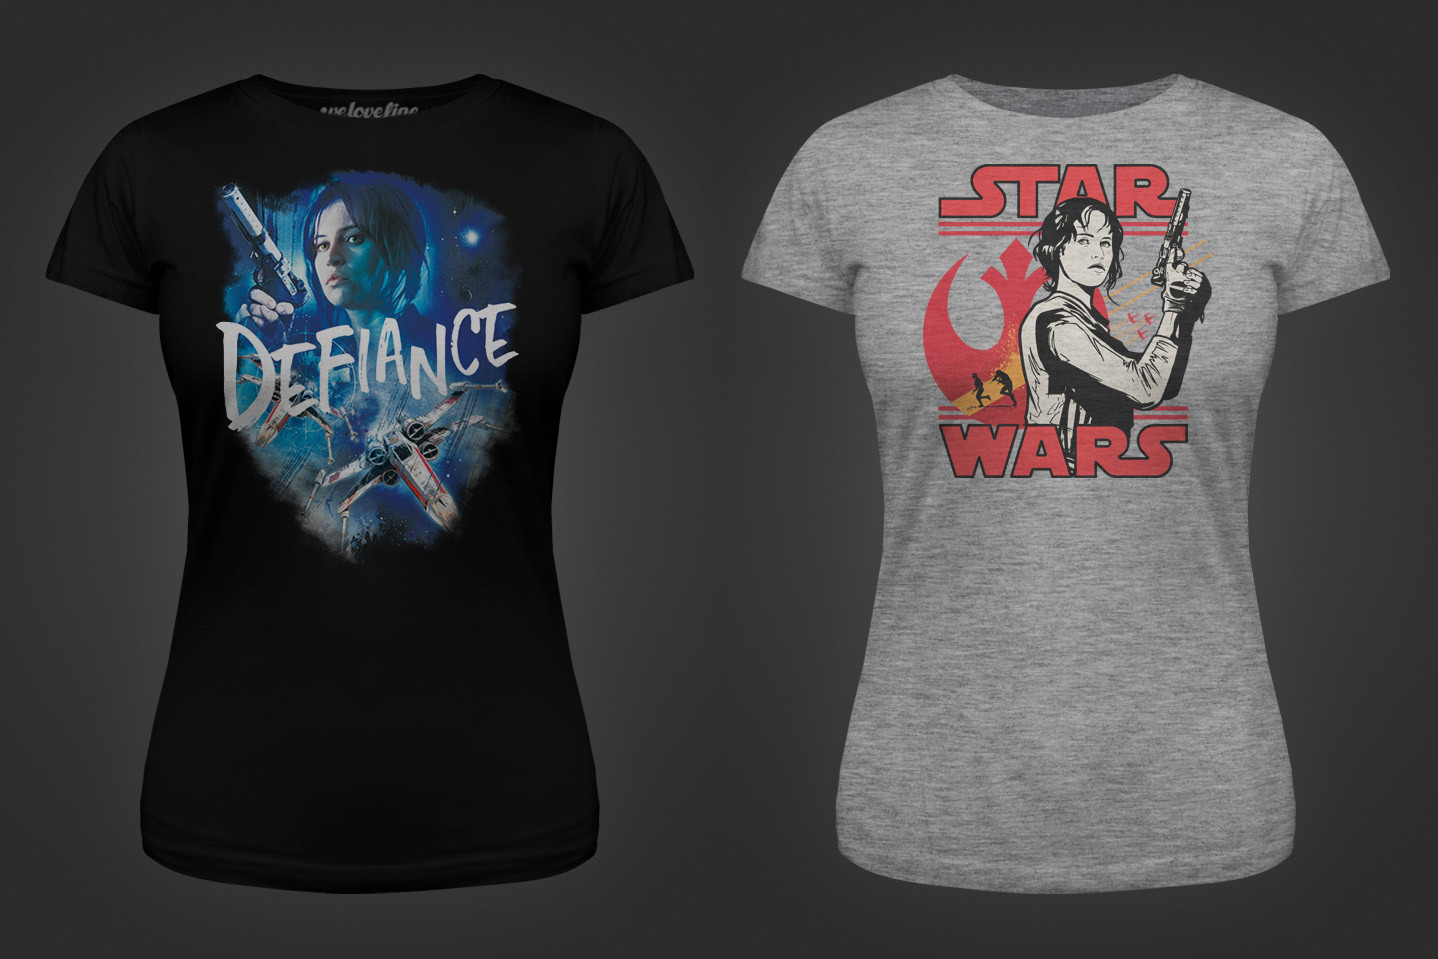 Women’s Rogue One tees at We Love Fine